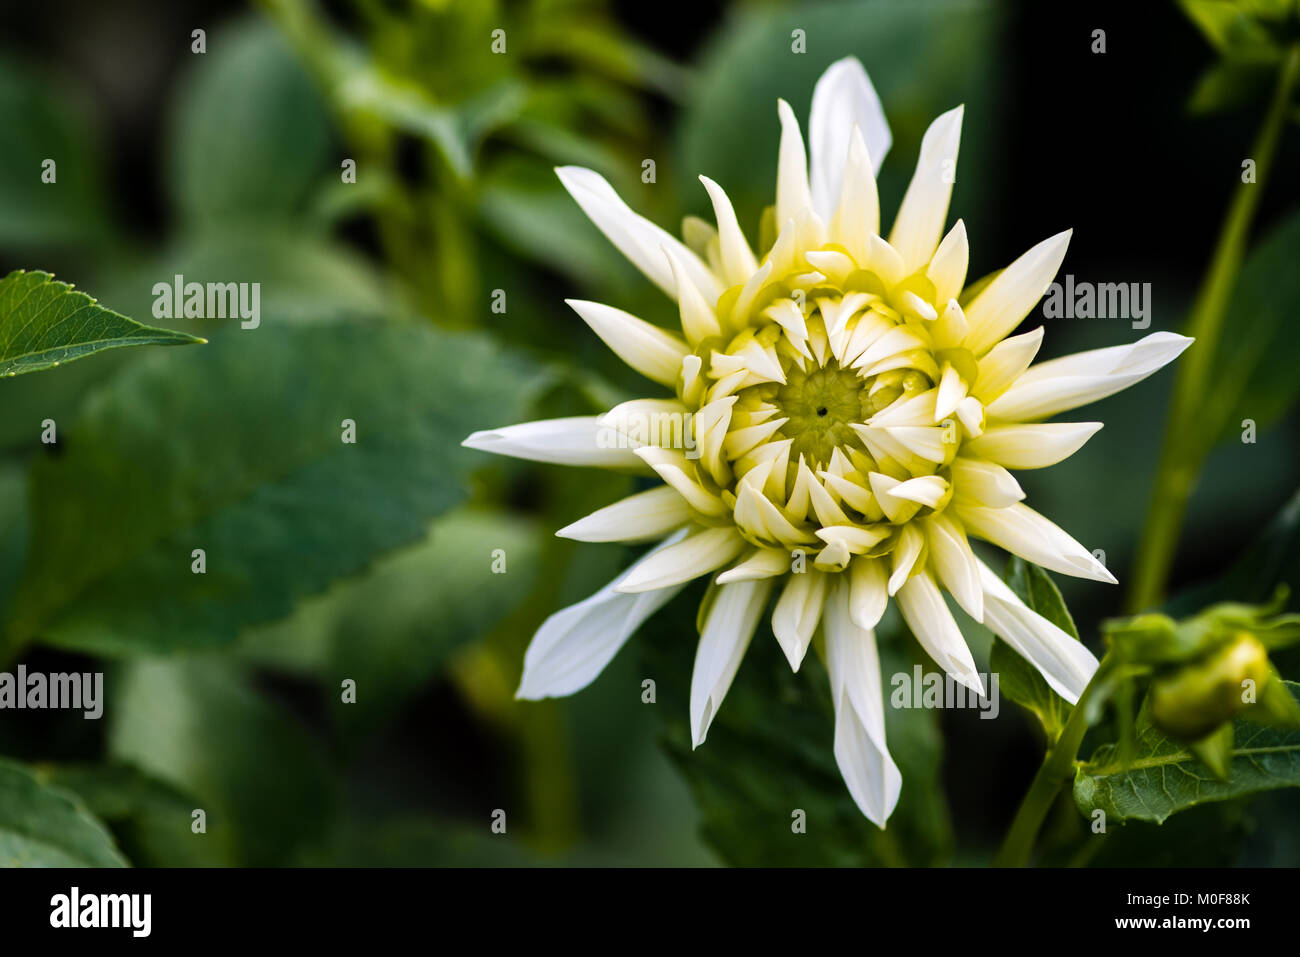 Dahlia Cactus Tall White. Double blooms, ray florets pointed, with majority revolute (rolled) over more than fifty percent of their longitudinal axis, Stock Photo